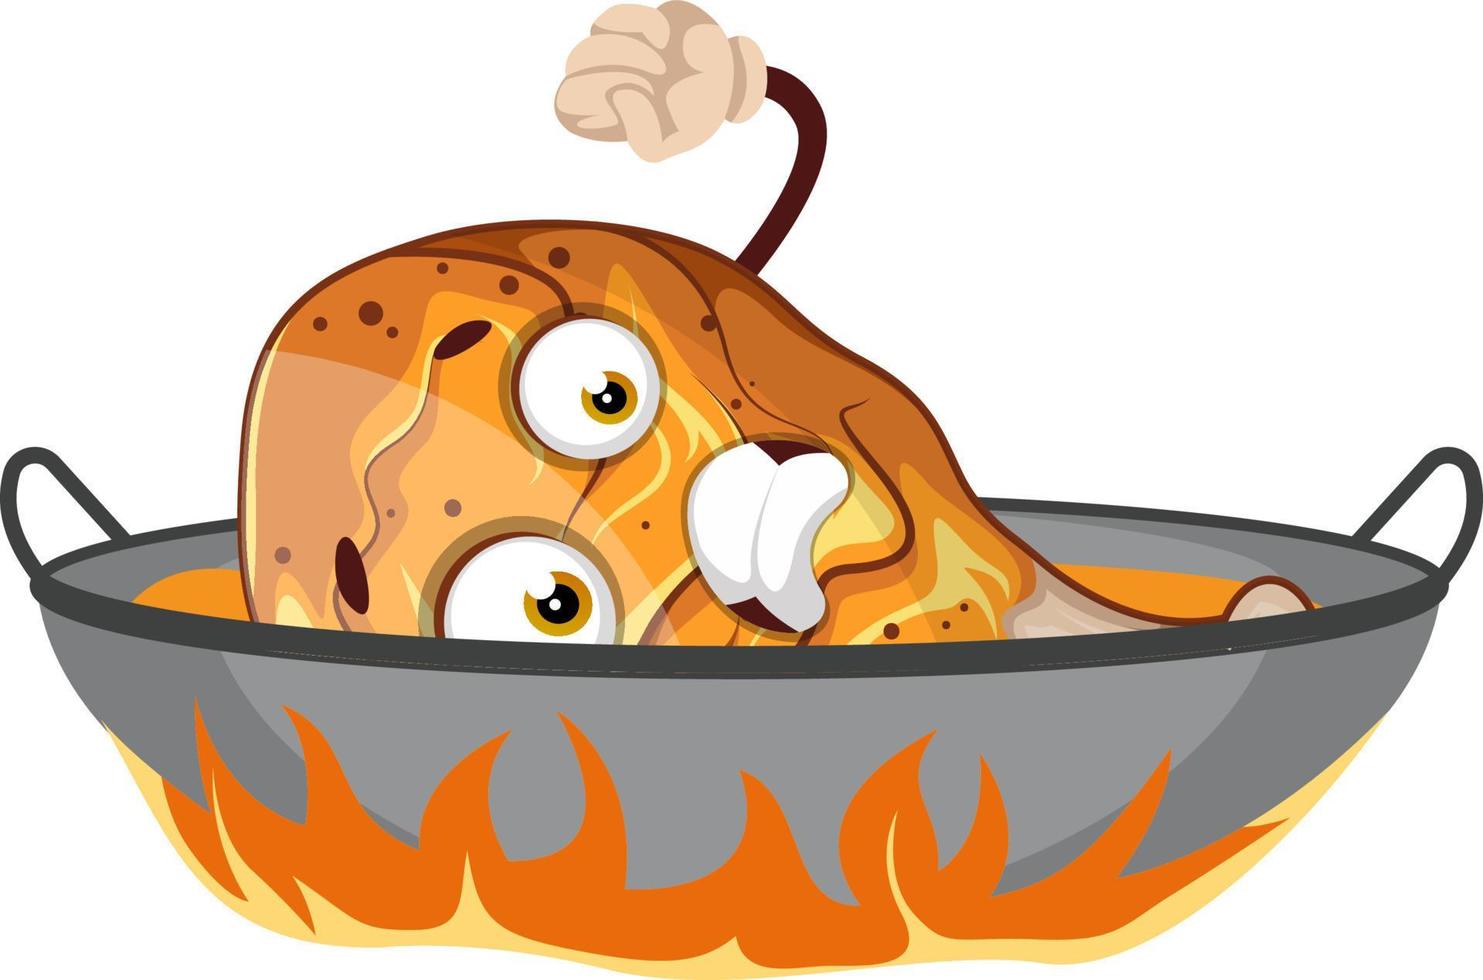 Afraid chicken drumstick in the frying pan, illustration, vector on white background.